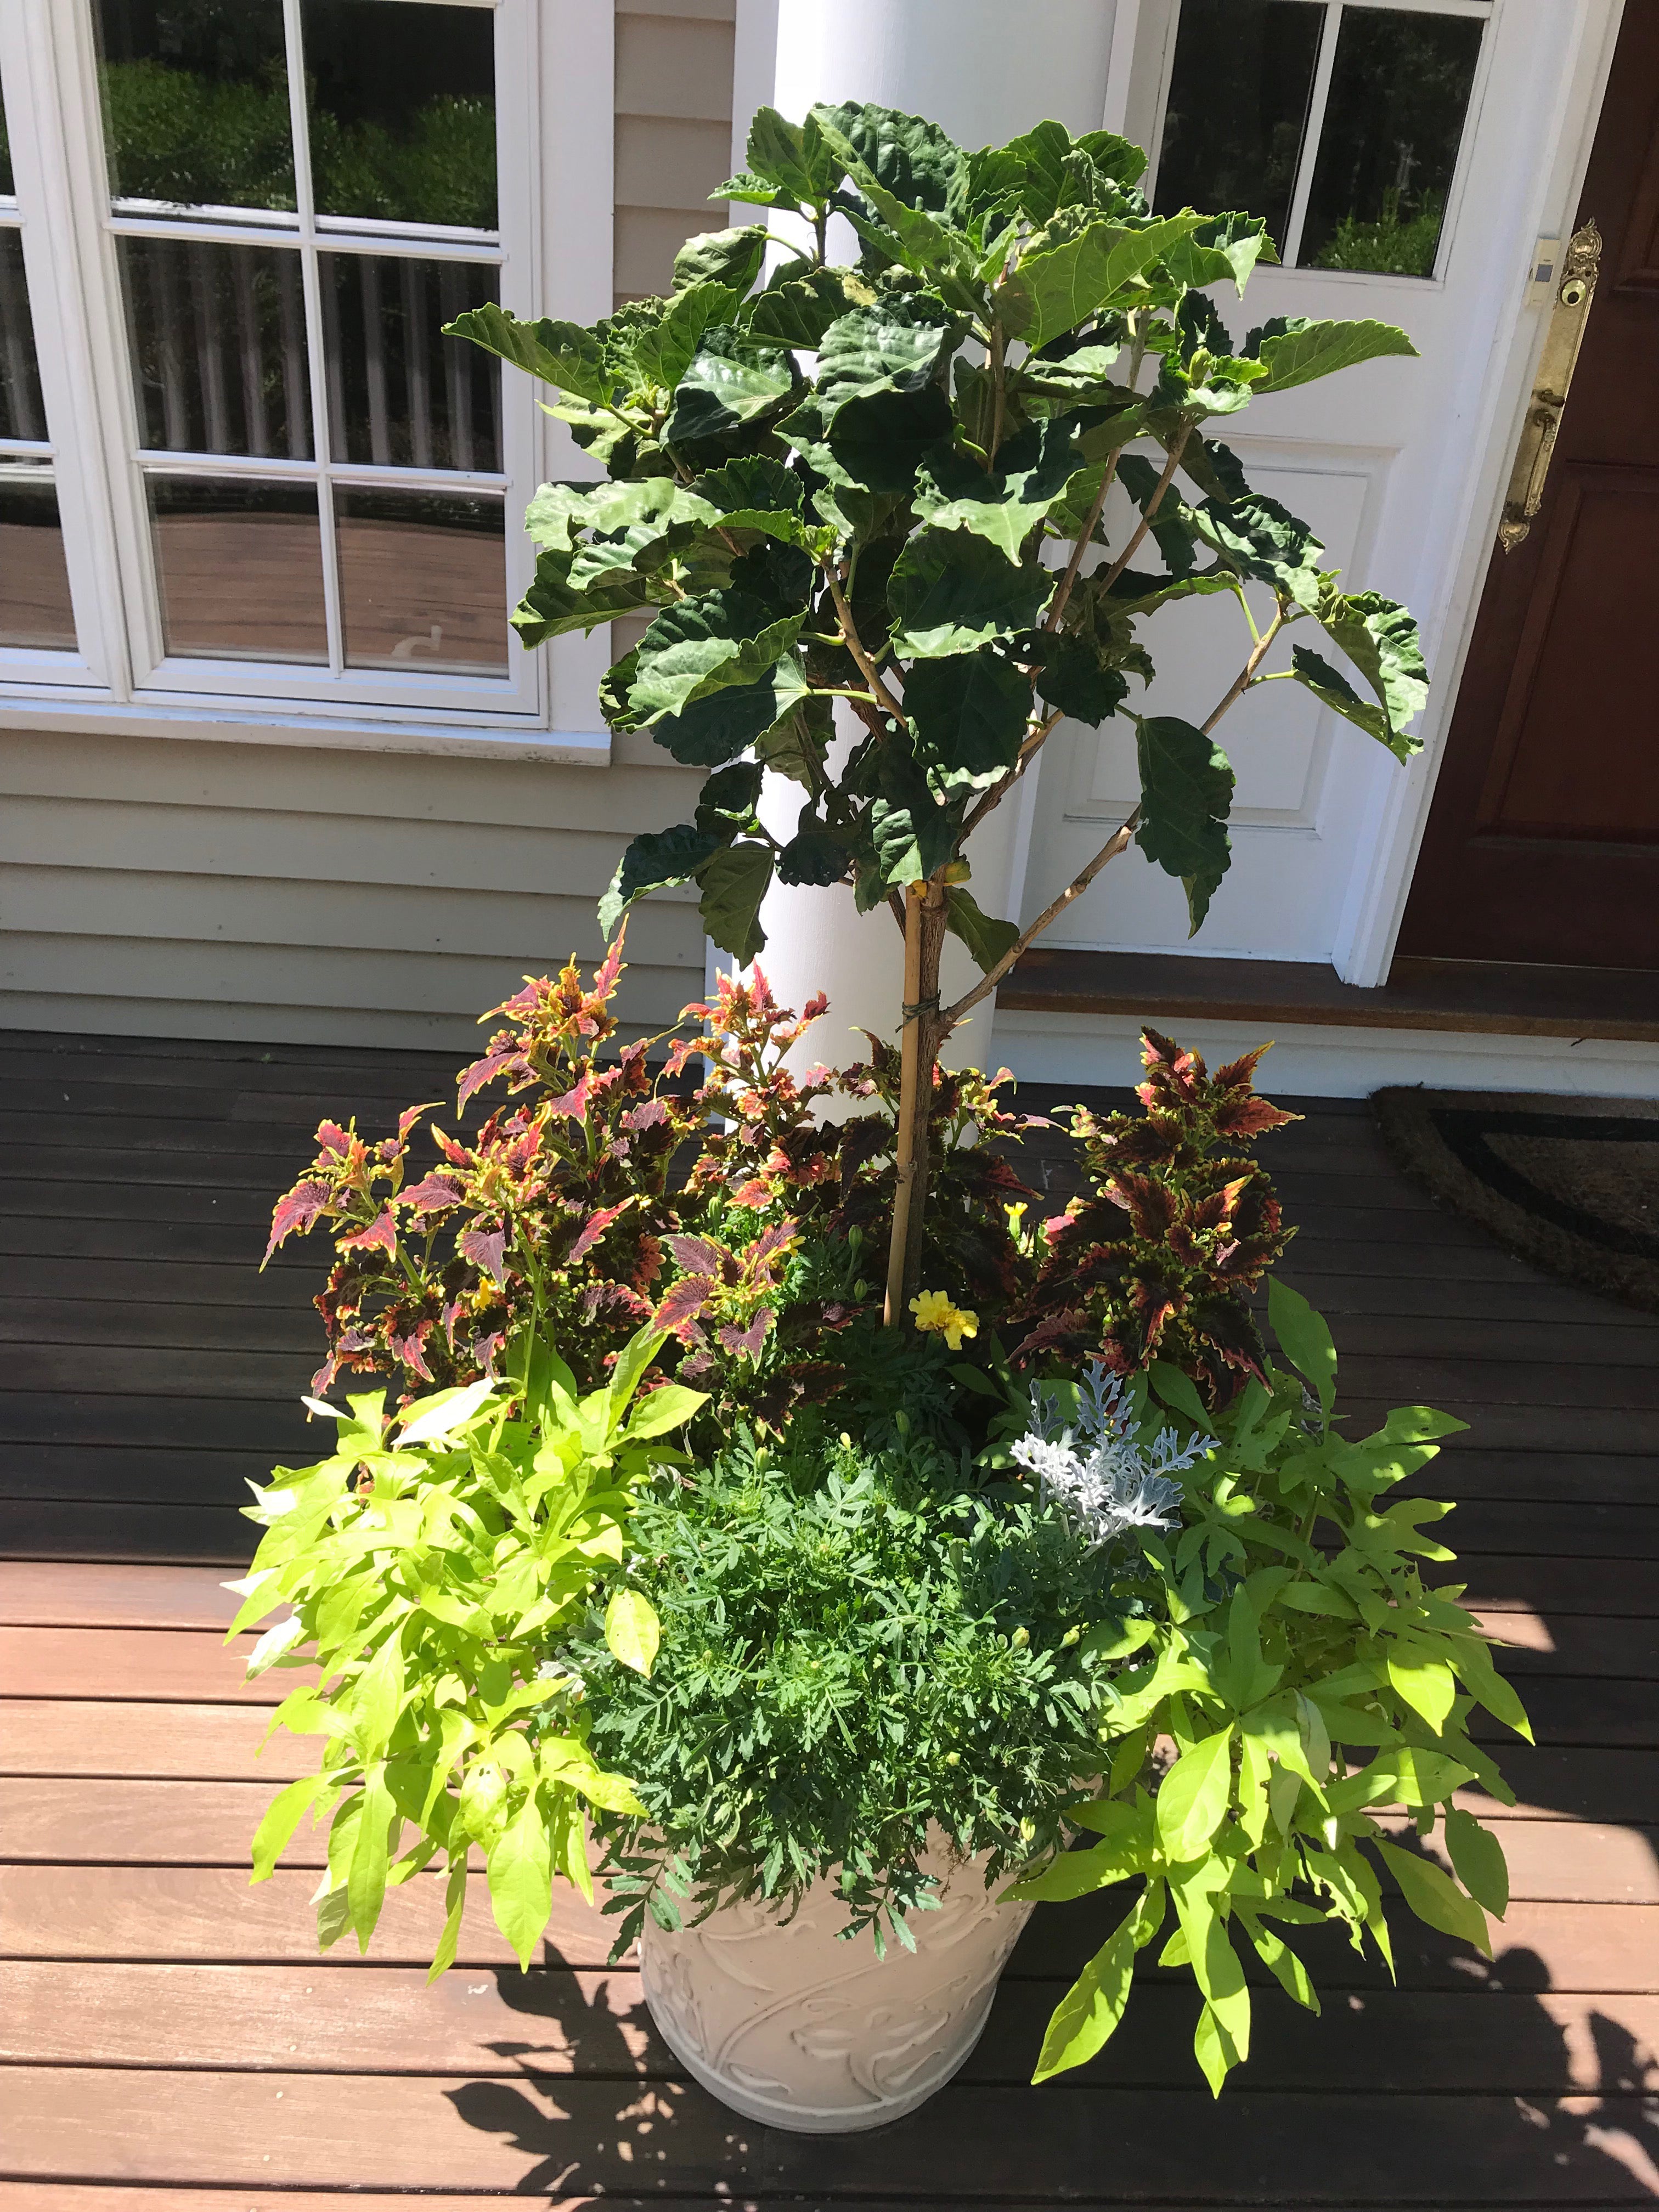 Summer Potted Garden with Sweet Potatoes and Tree